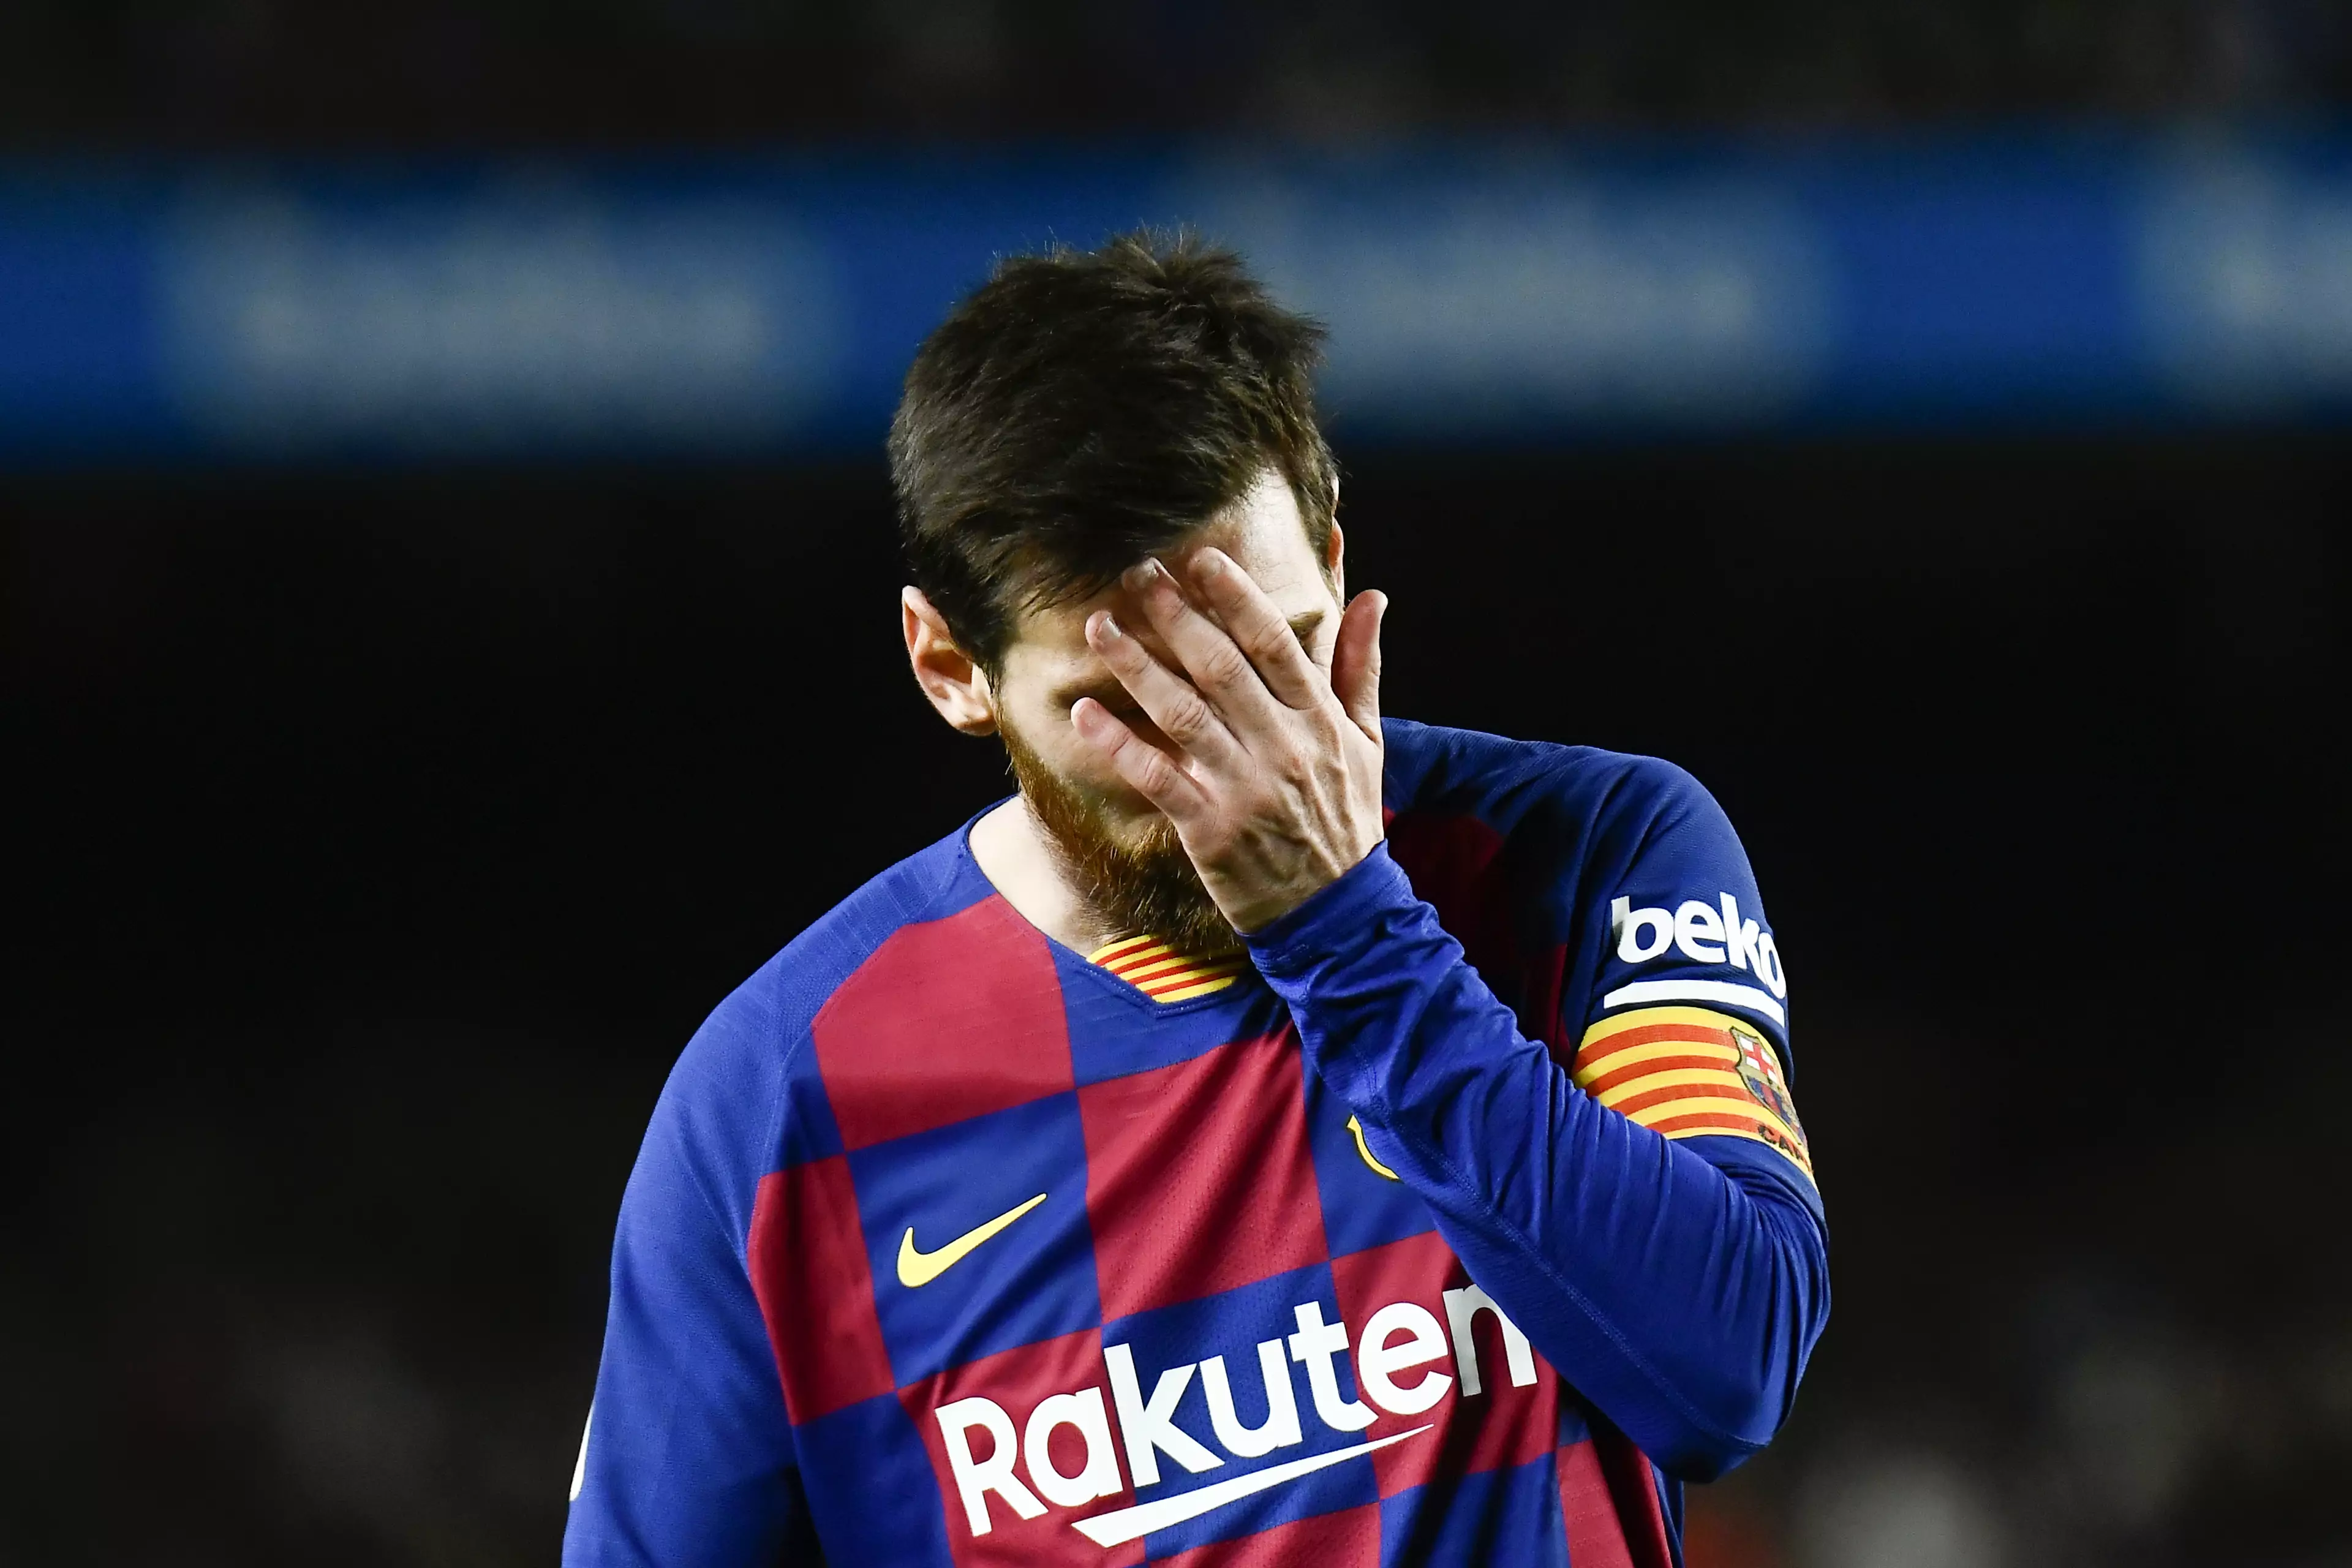 Life at the Camp Nou isn't good for Messi right now. Image: PA Images